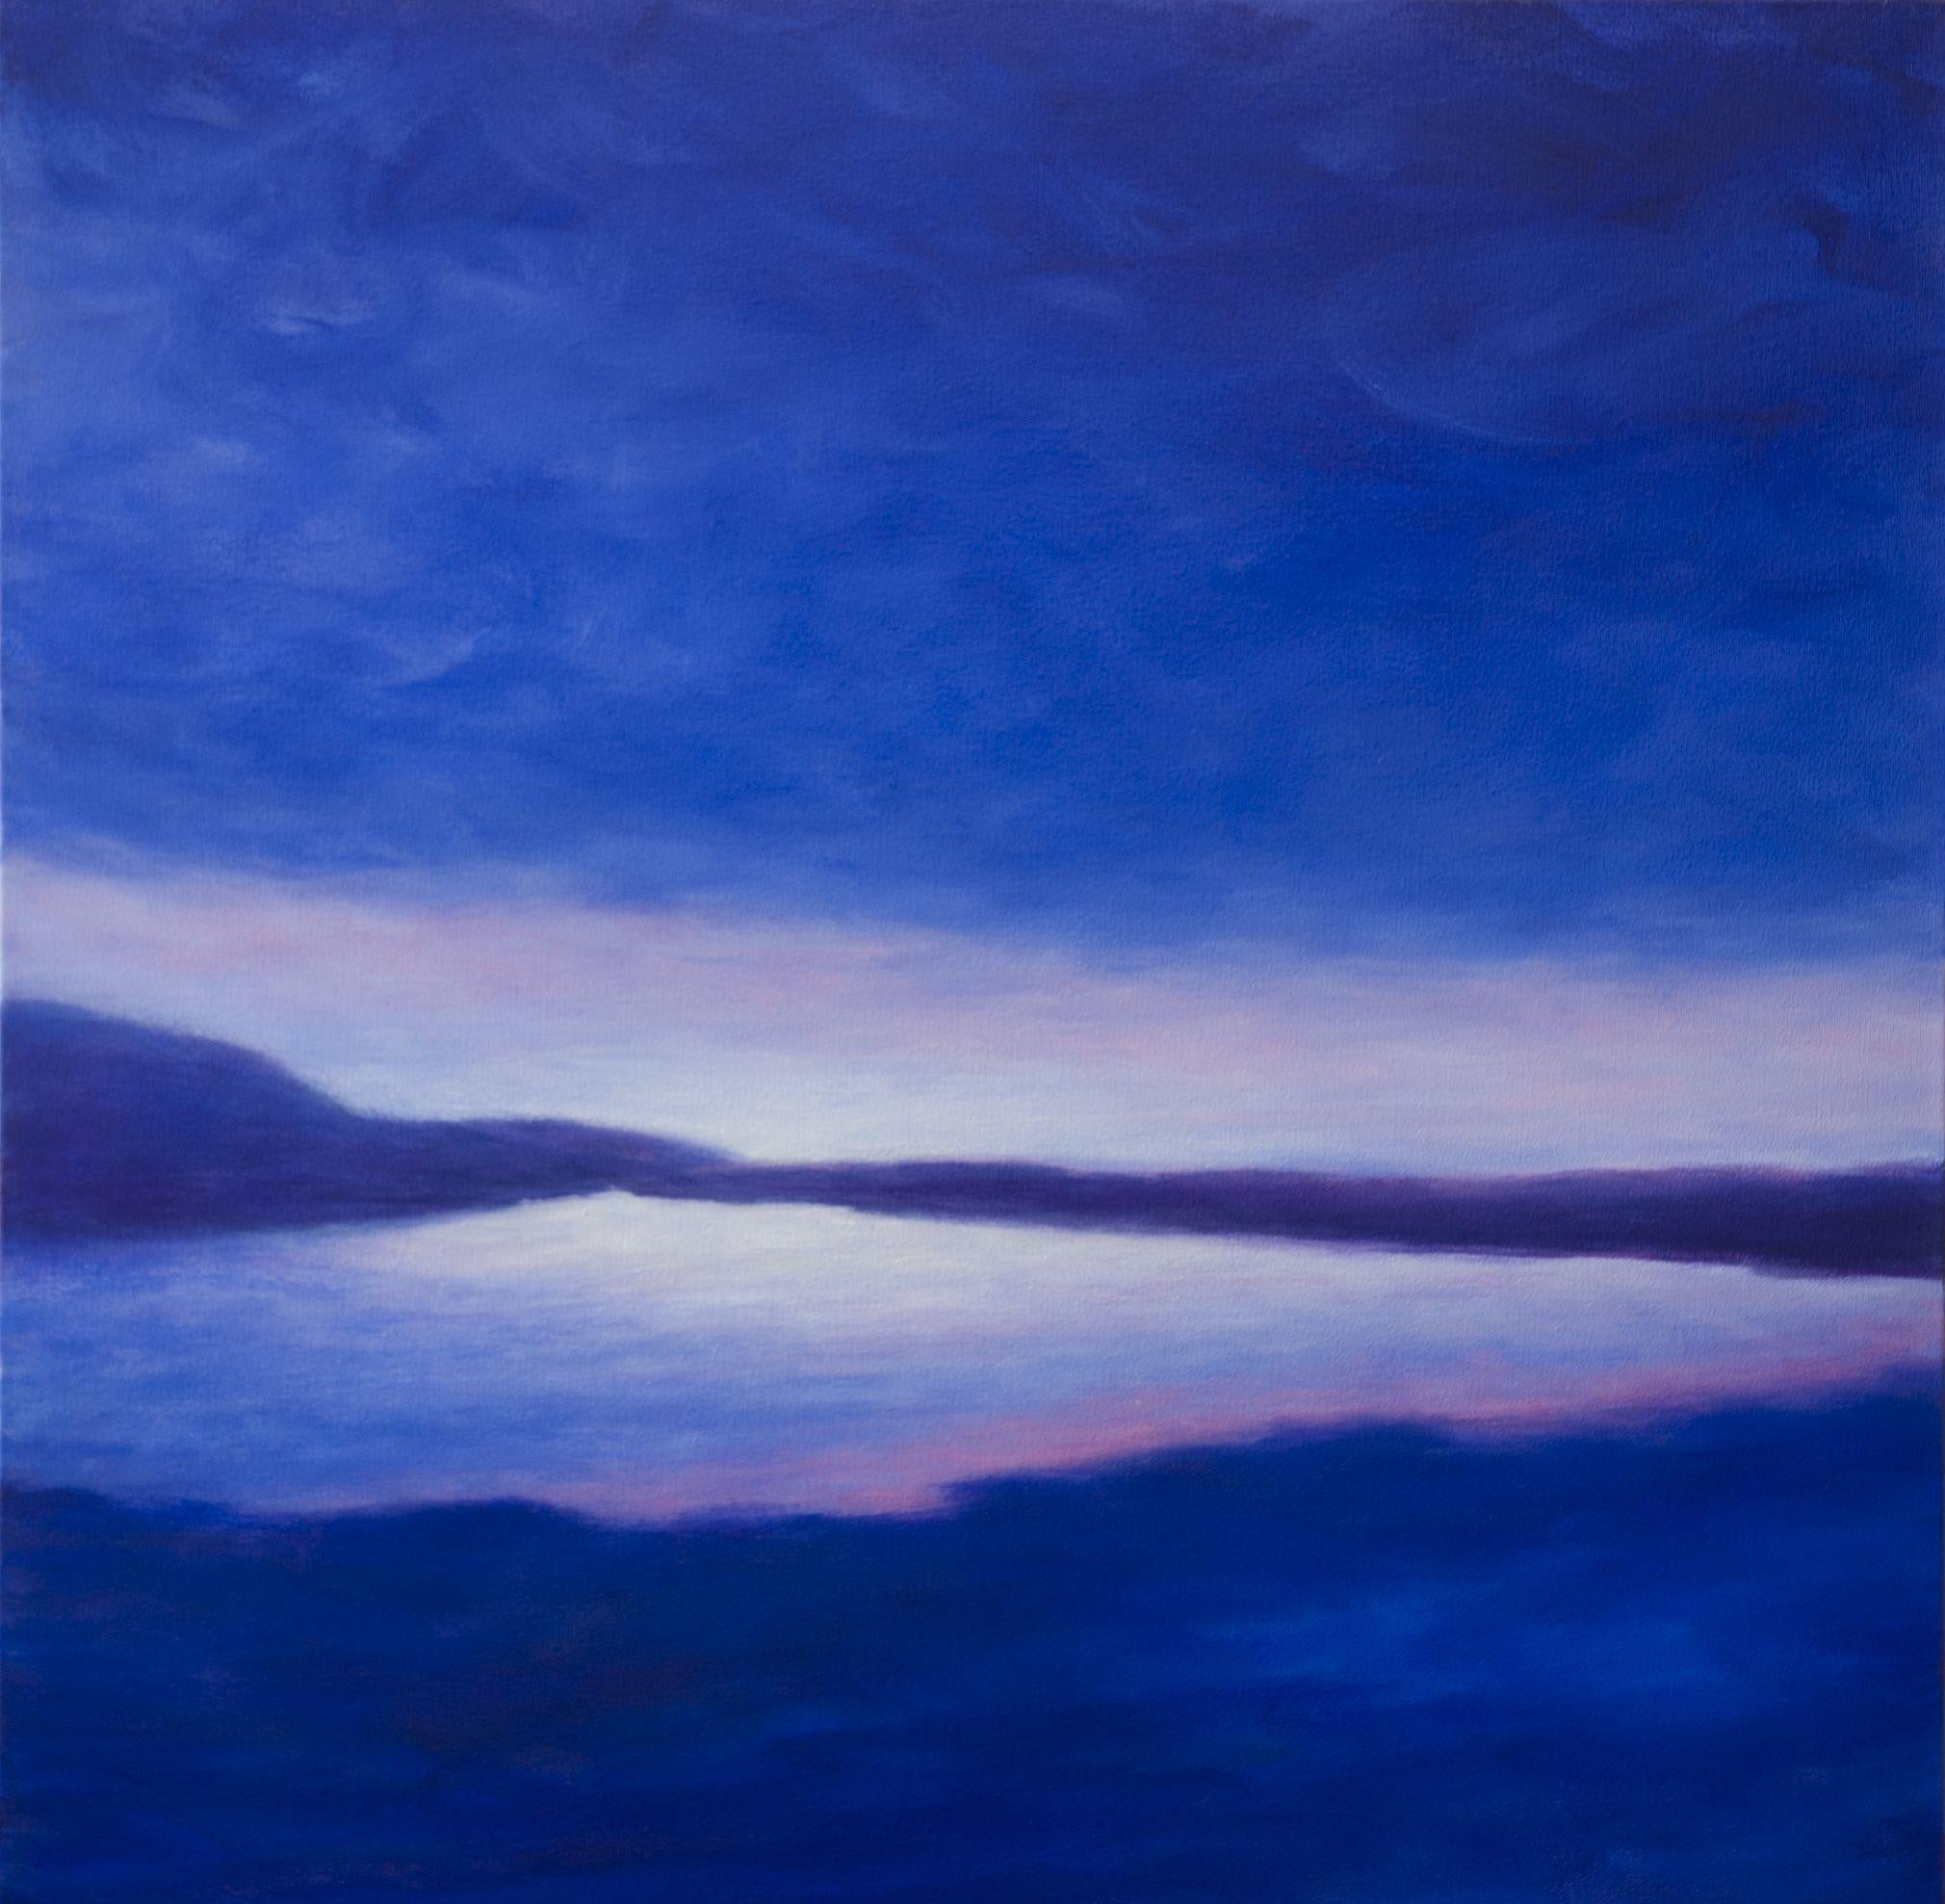 Victoria Veedell Landscape Painting - Low Sky Over Laugarvatn, Painting, Oil on Canvas